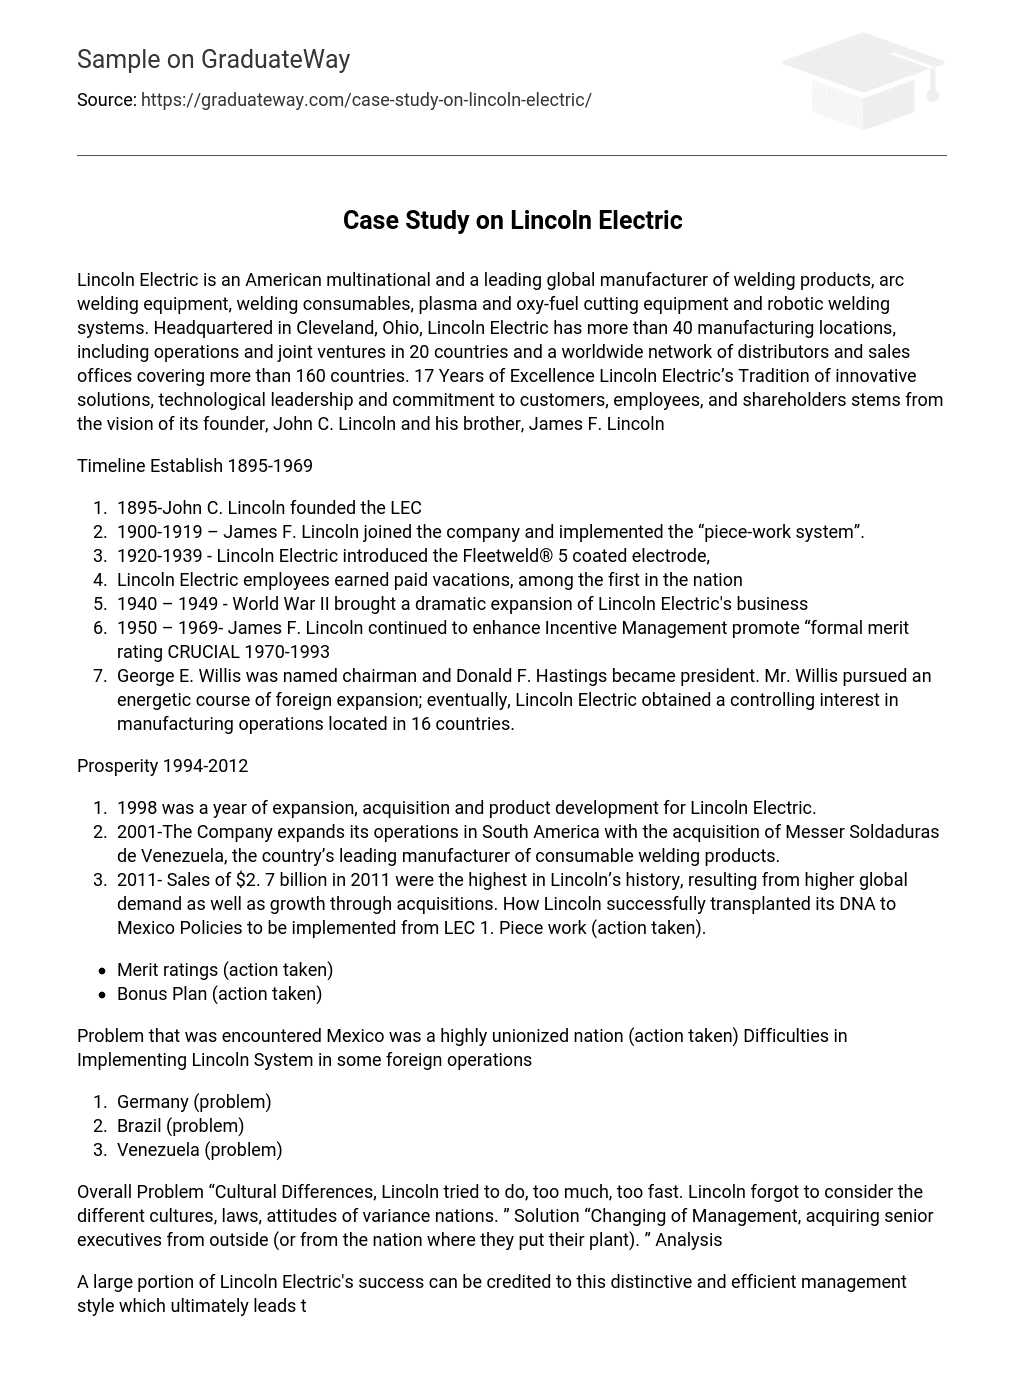 Case Study on Lincoln Electric